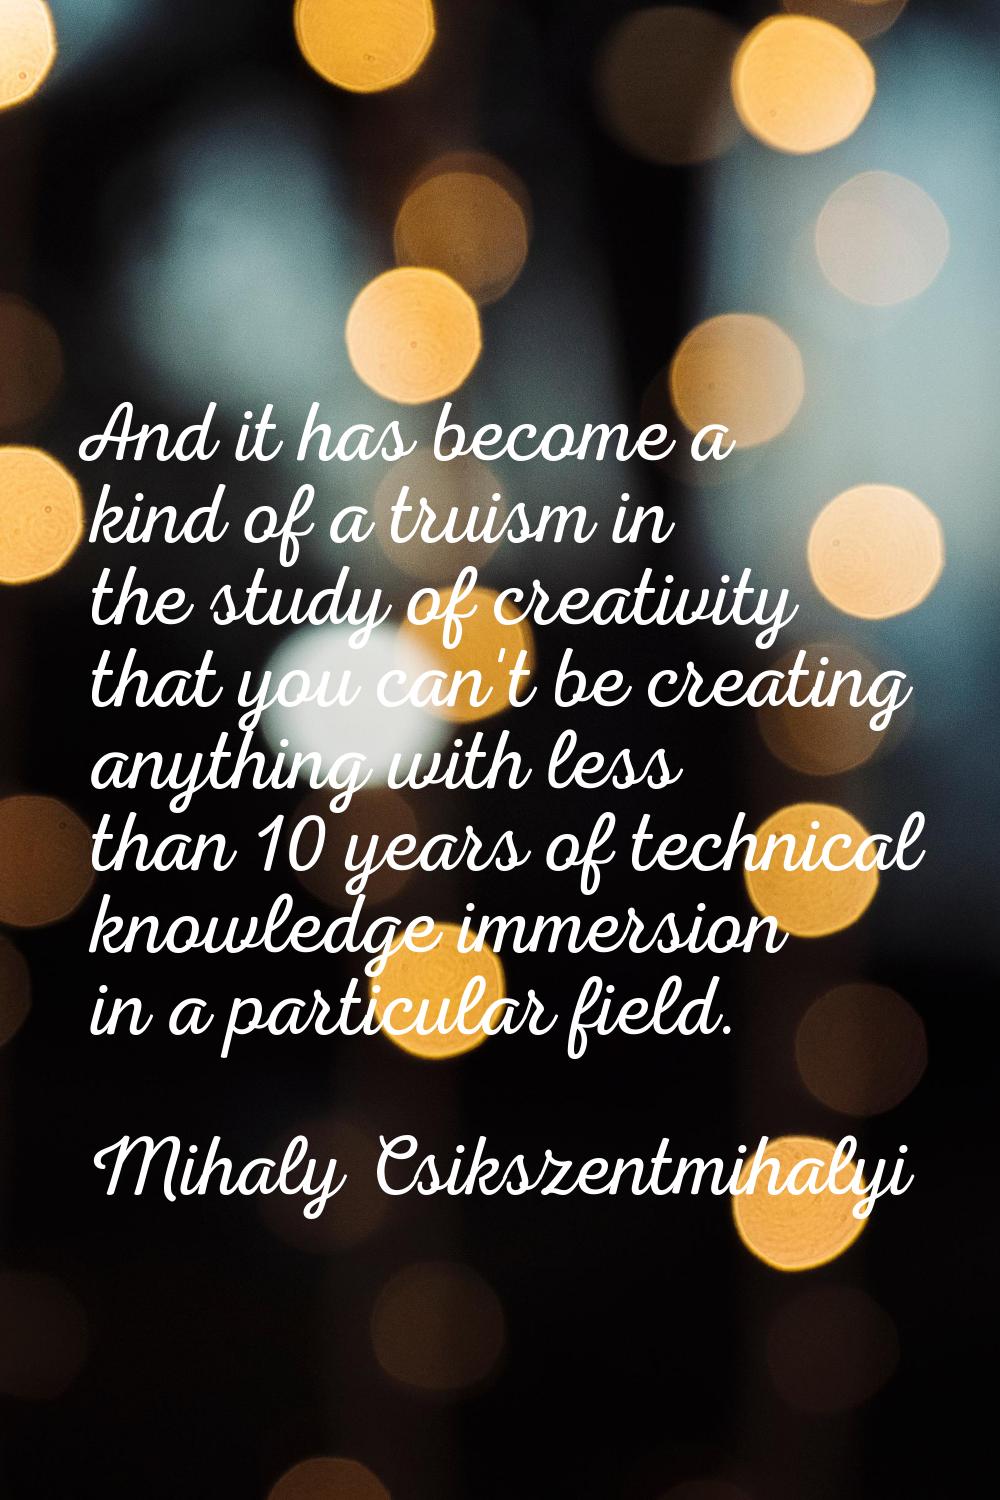 And it has become a kind of a truism in the study of creativity that you can't be creating anything